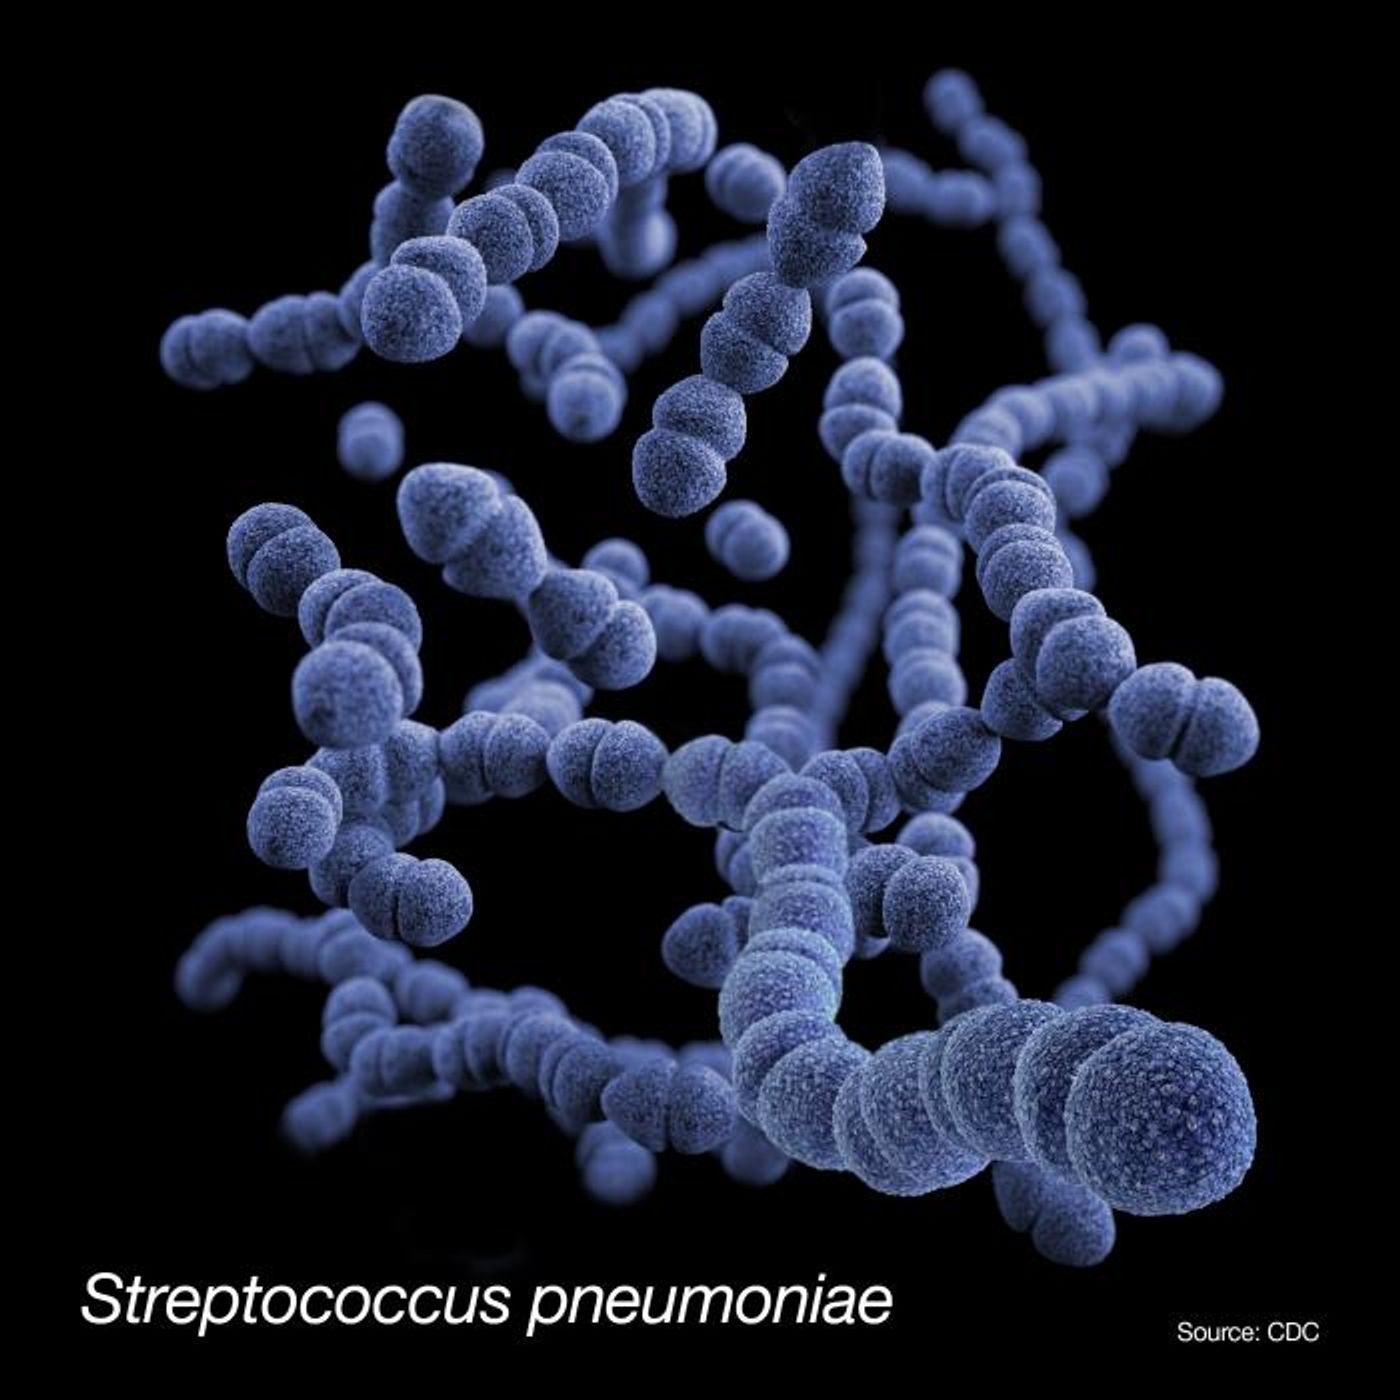 An illustration of a 3D, computer-generated image of Streptococcus pneumoniae bacteria.  / Credit: CDC/ Antibiotic Resistance Coordination and Strategy Unit / Dan Higgins - Medical Illustrator